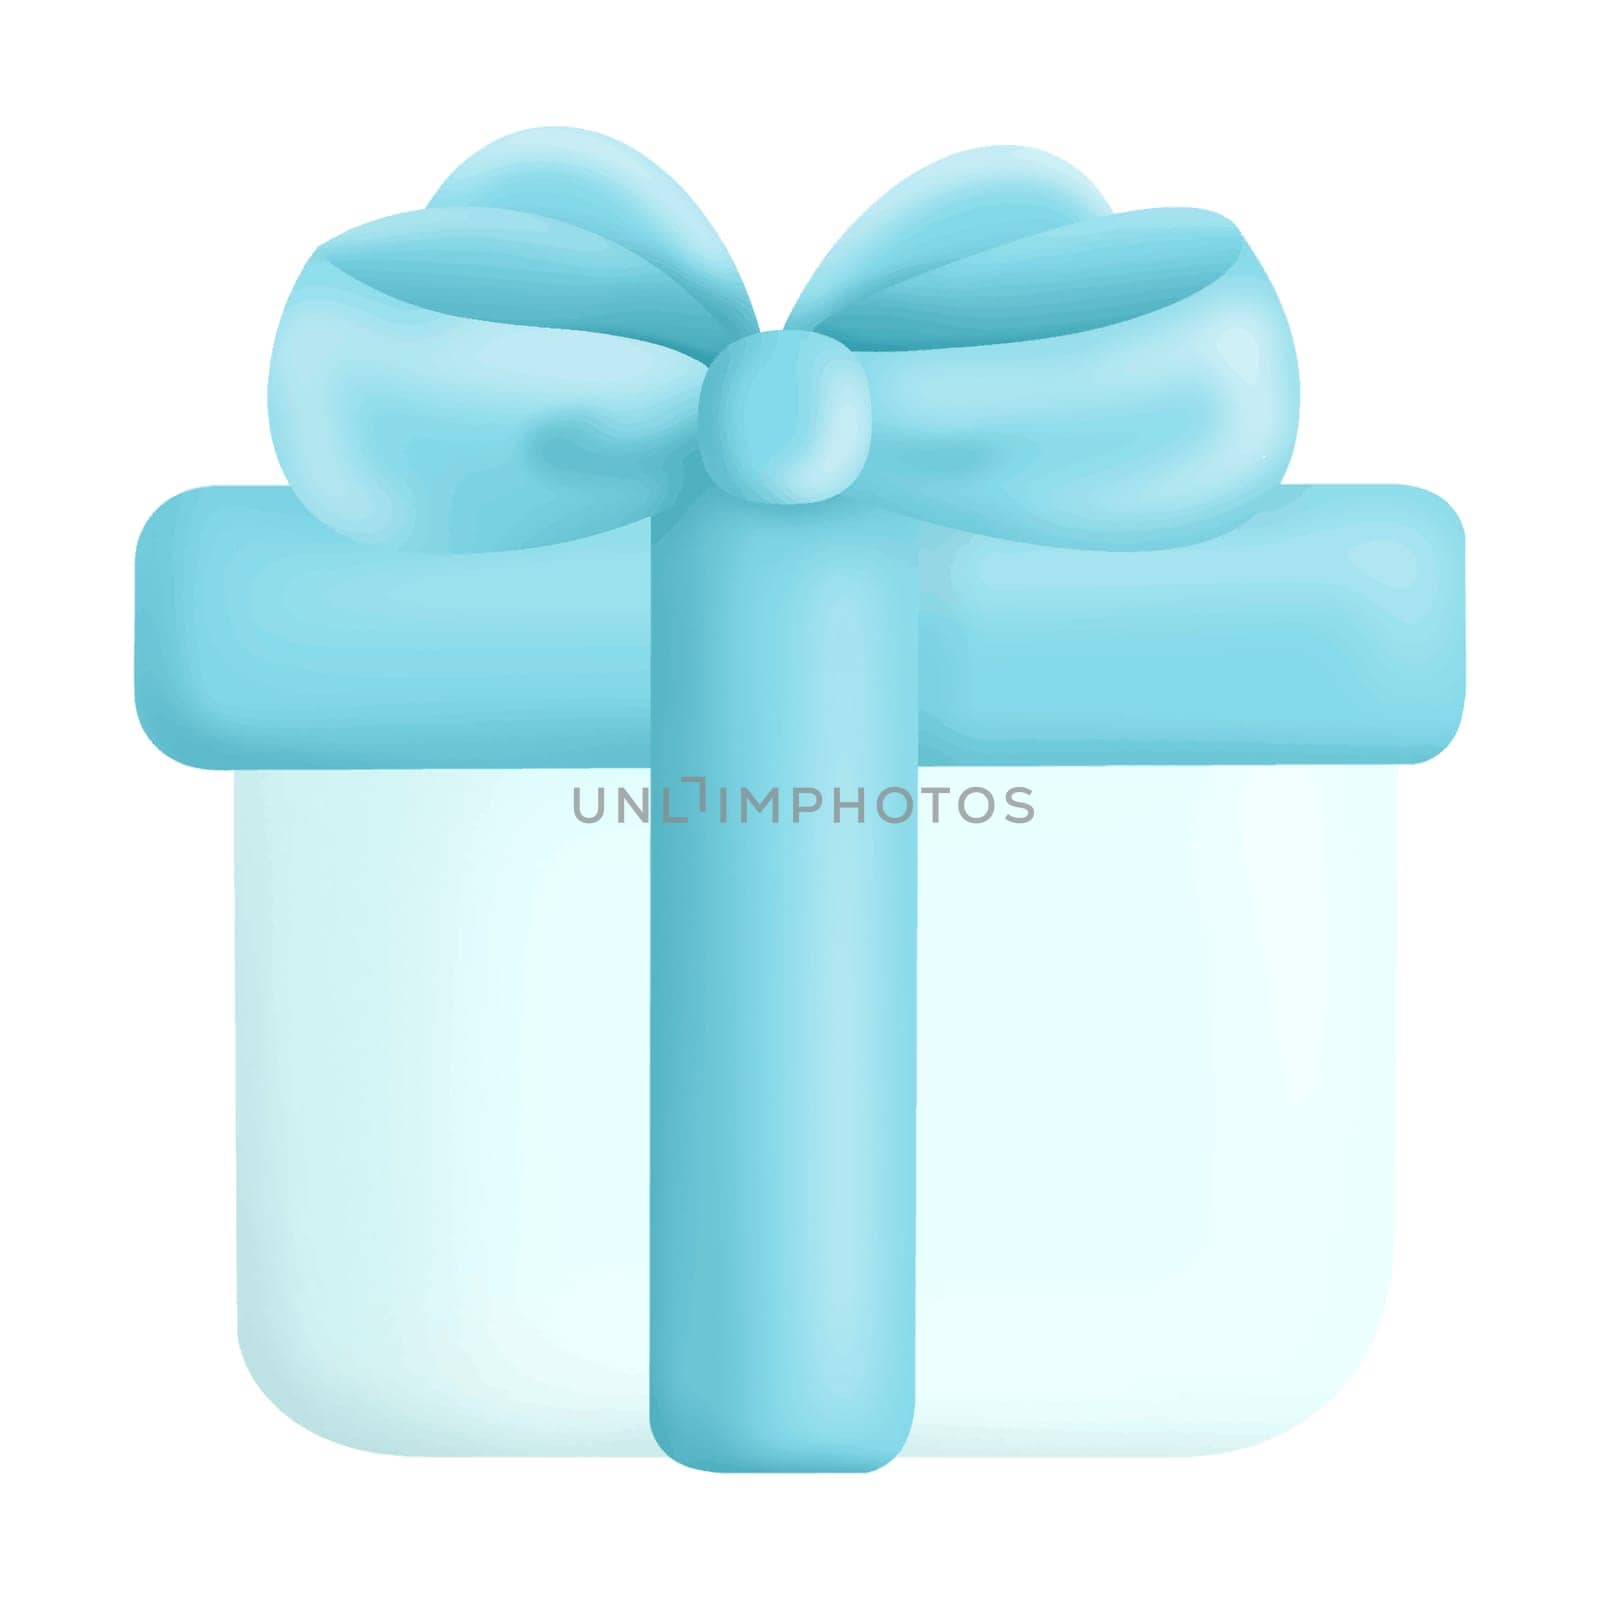 Blue Pastel Gift Box illustration isolated Clipart. Blue Pastel Party Gift Box Clipart for celebration design, planner sticker, pattern, background, invitations, greeting cards, sublimation.